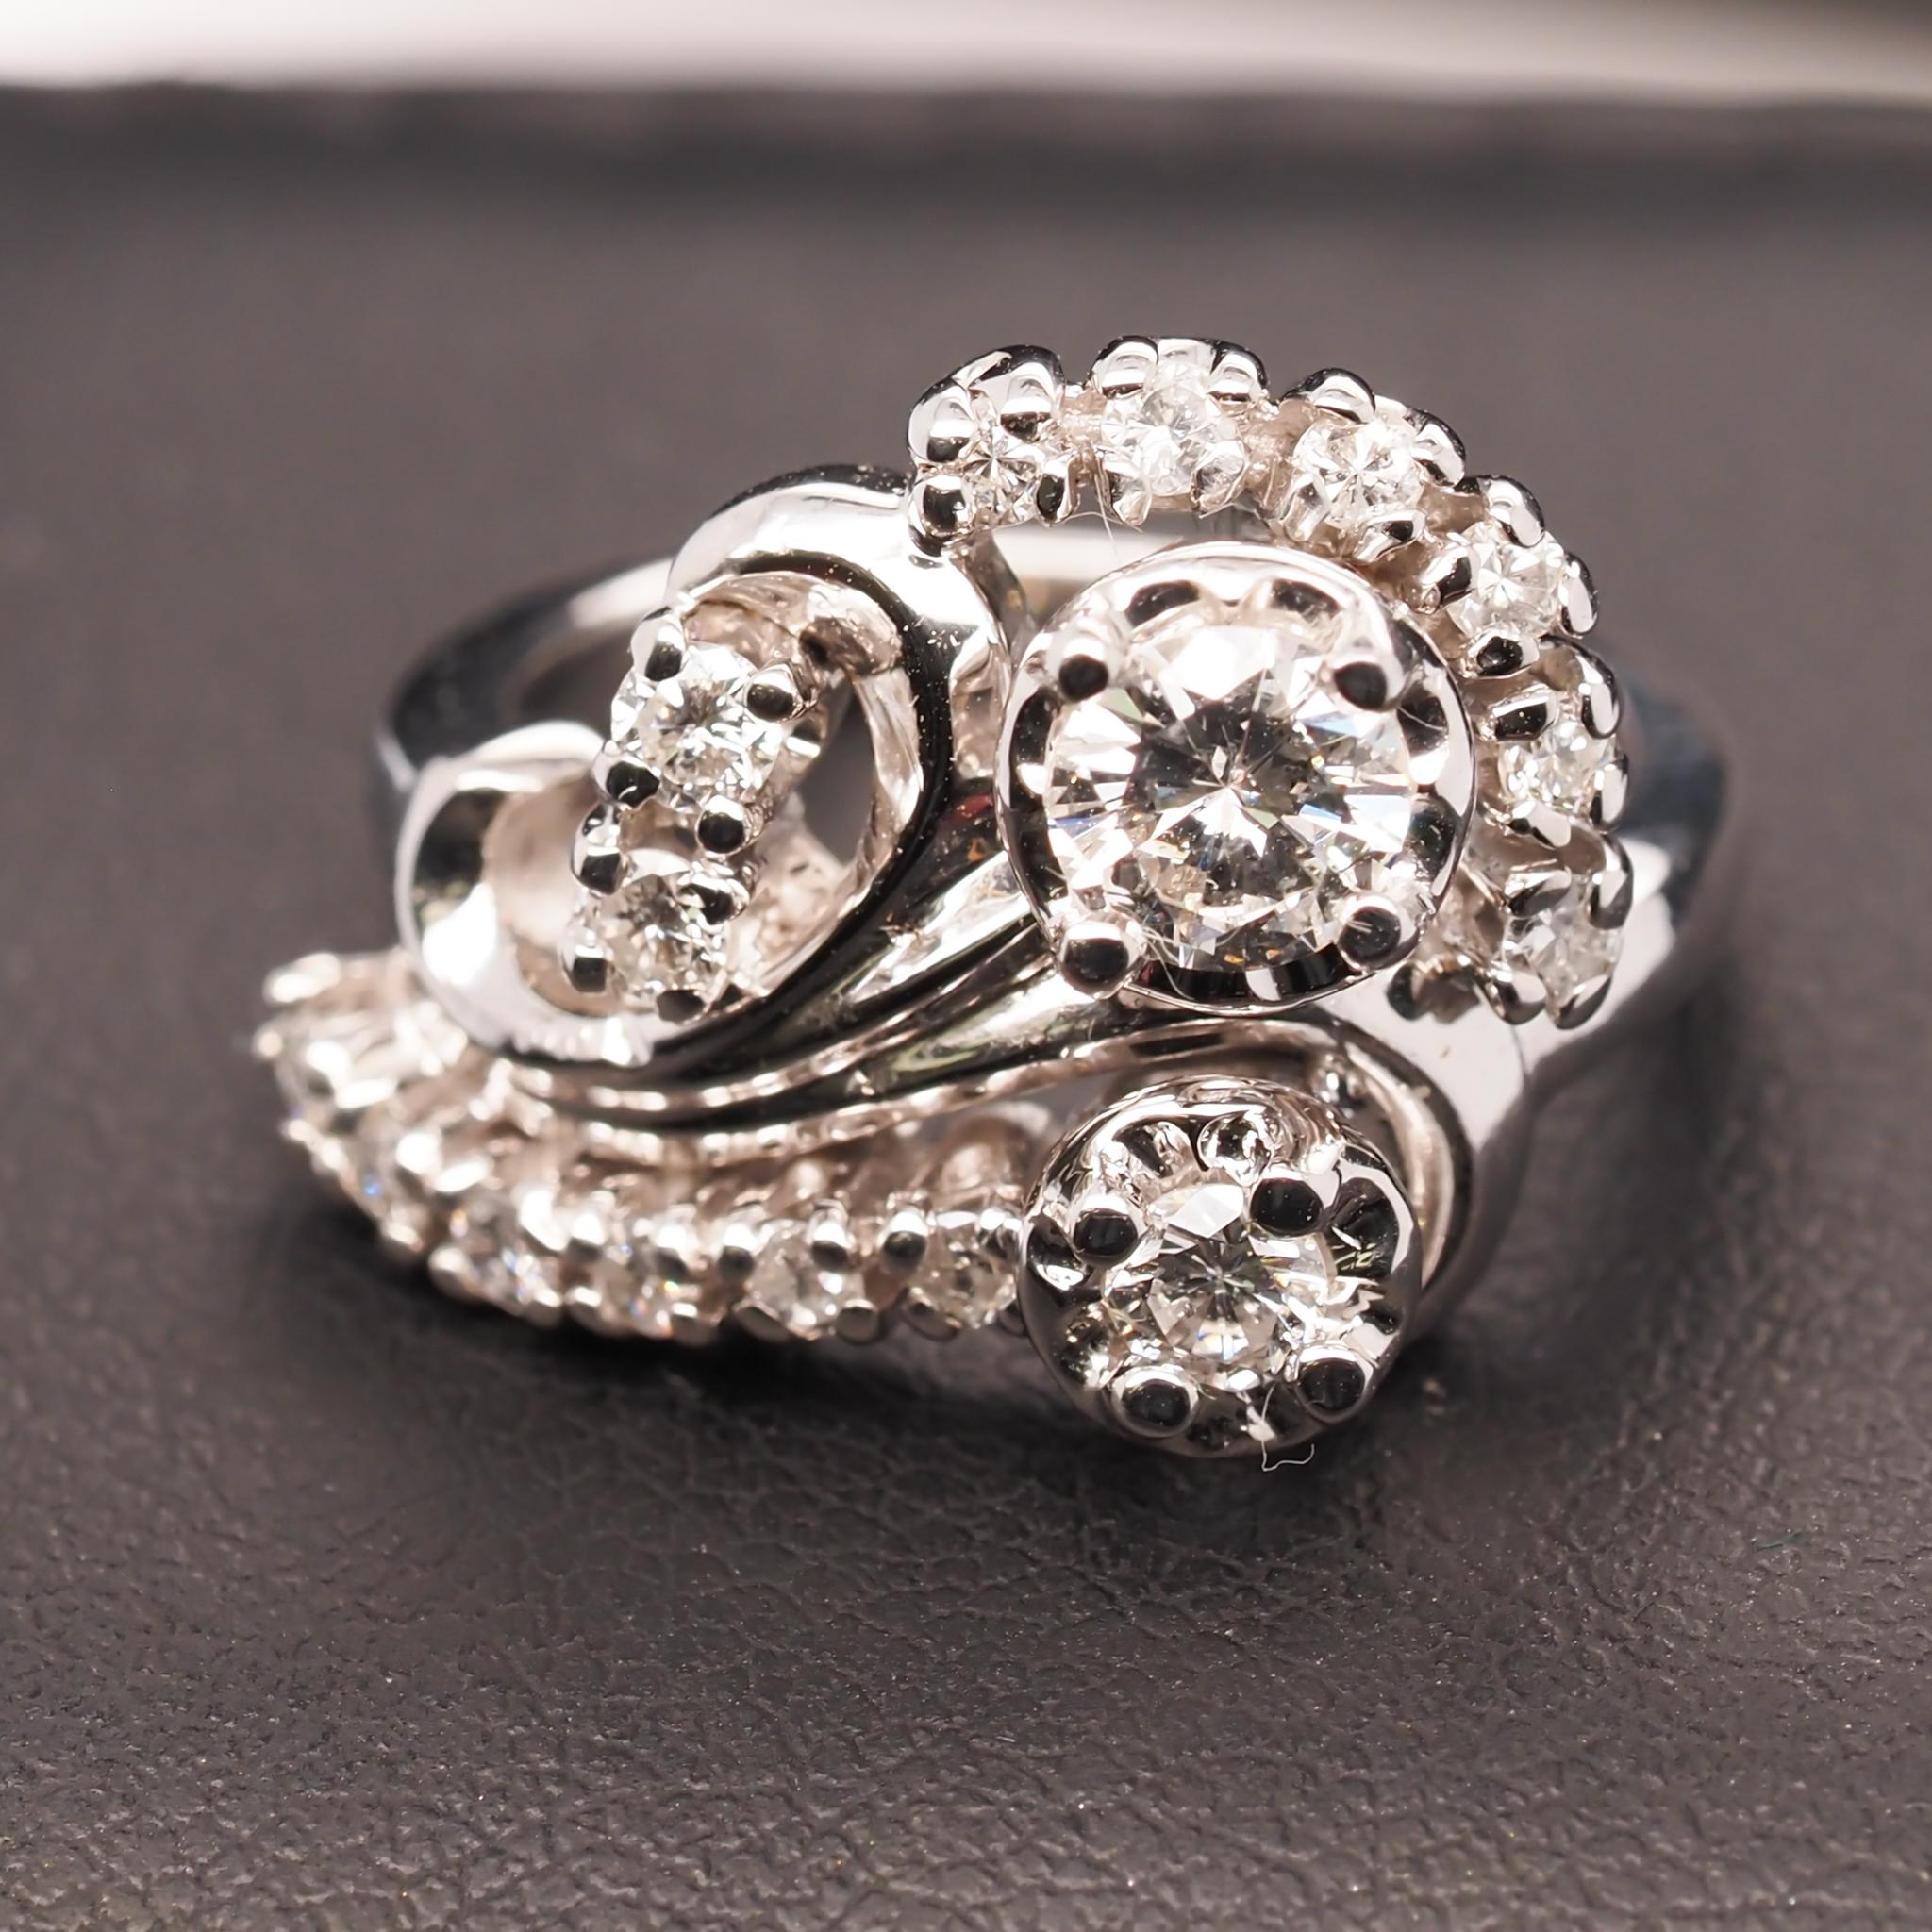 Year: 1960s

Item Details:
Ring Size: 3.5
Metal Type: 14K White Gold [Hallmarked, and Tested]
Weight: 6.2 grams

Diamond Details: .60ct total weight, H Color, SI2-I1 clarity, Round Brilliant, Natural Diamonds

Band Width: 2 mm
Condition: Excellent

